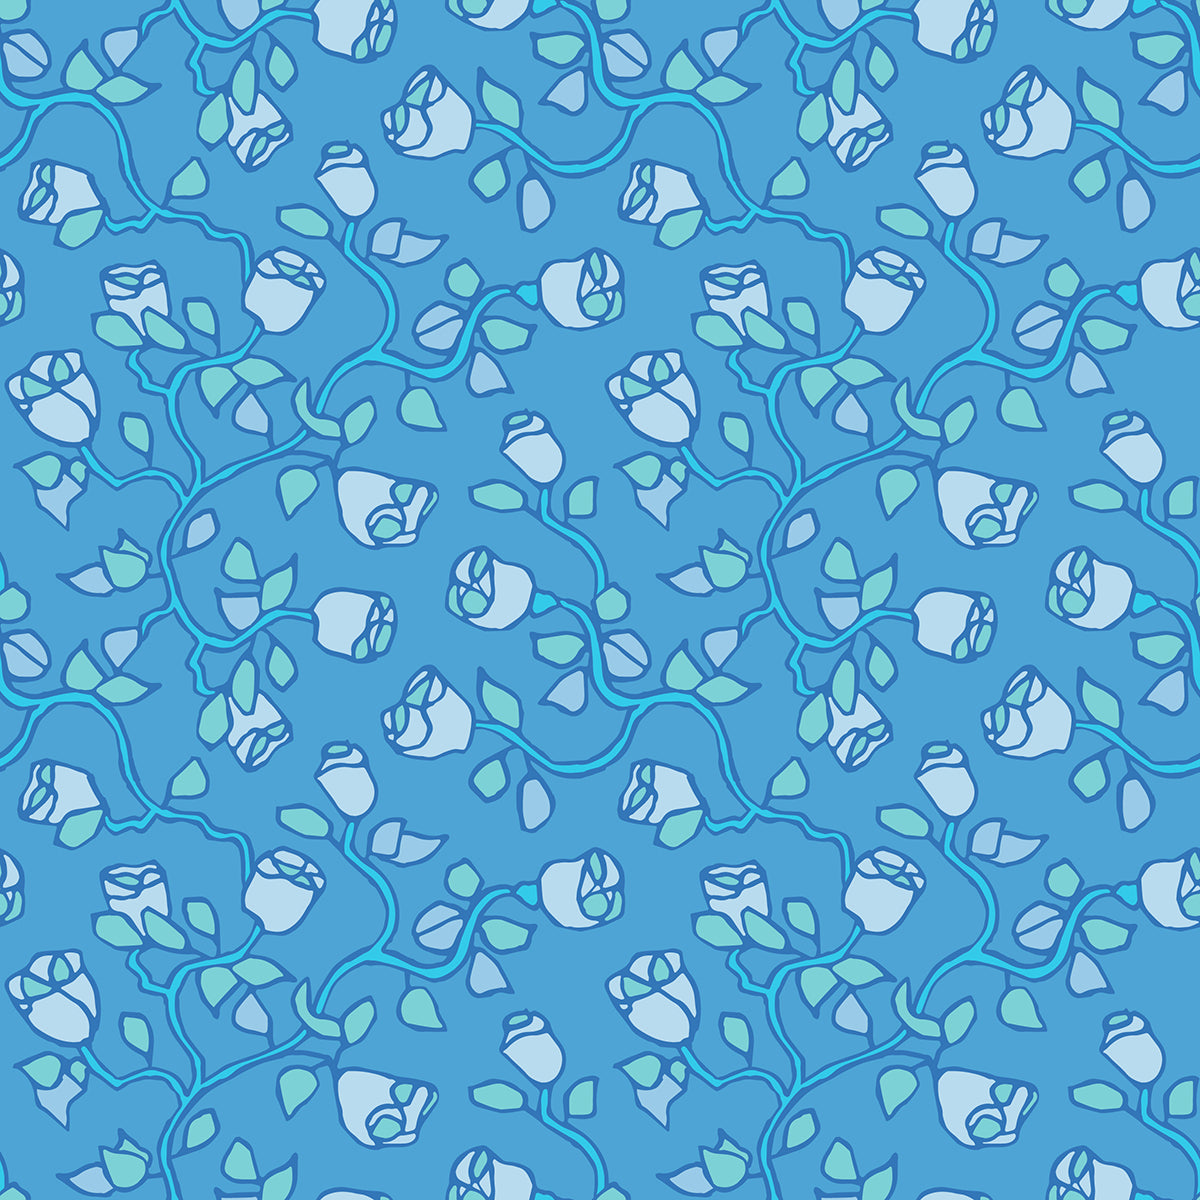 Beach Rose Sky features a repeating pattern in blue and green colors of organic, hand-drawn rose vines.